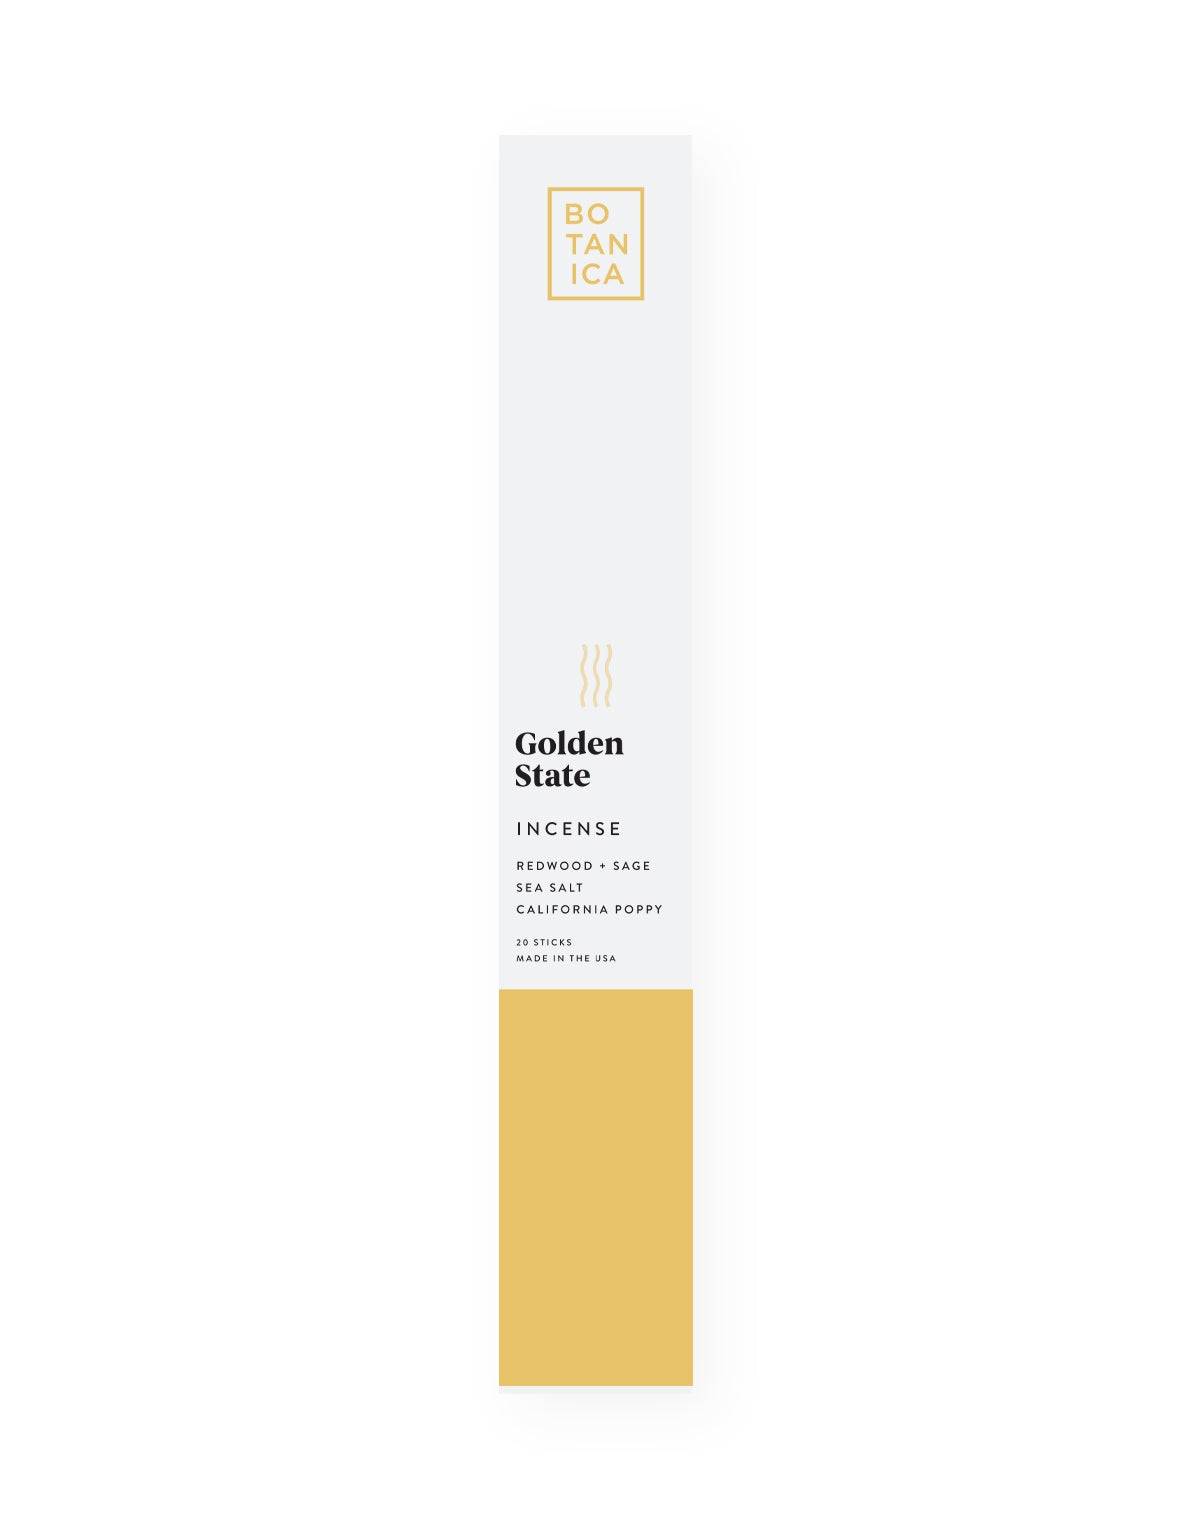 botanica golden state incense. Made with high-quality fragrance blends, plus essential oils for a long, balanced ritualistic experience–sure to make any dwelling feel like a luxurious retreat. Scent notes of California poppy, redwood, sage, and sea salt.